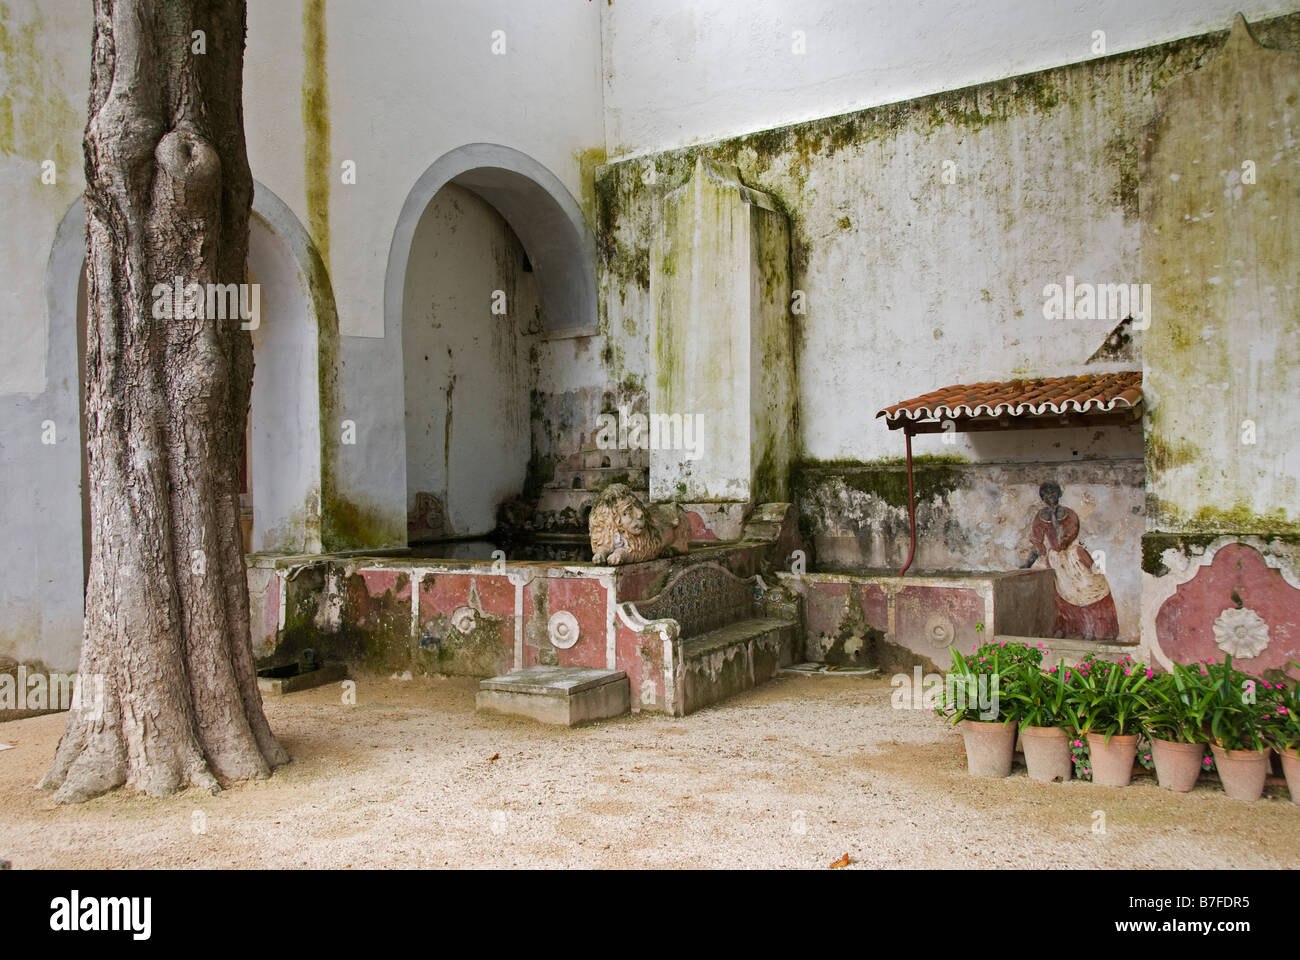 The 16c Palacio Nacional (National Palace), Sintra, Portugal. The garden courtyard, with a trompe-l'œil relief of a black servant girl at work Stock Photo